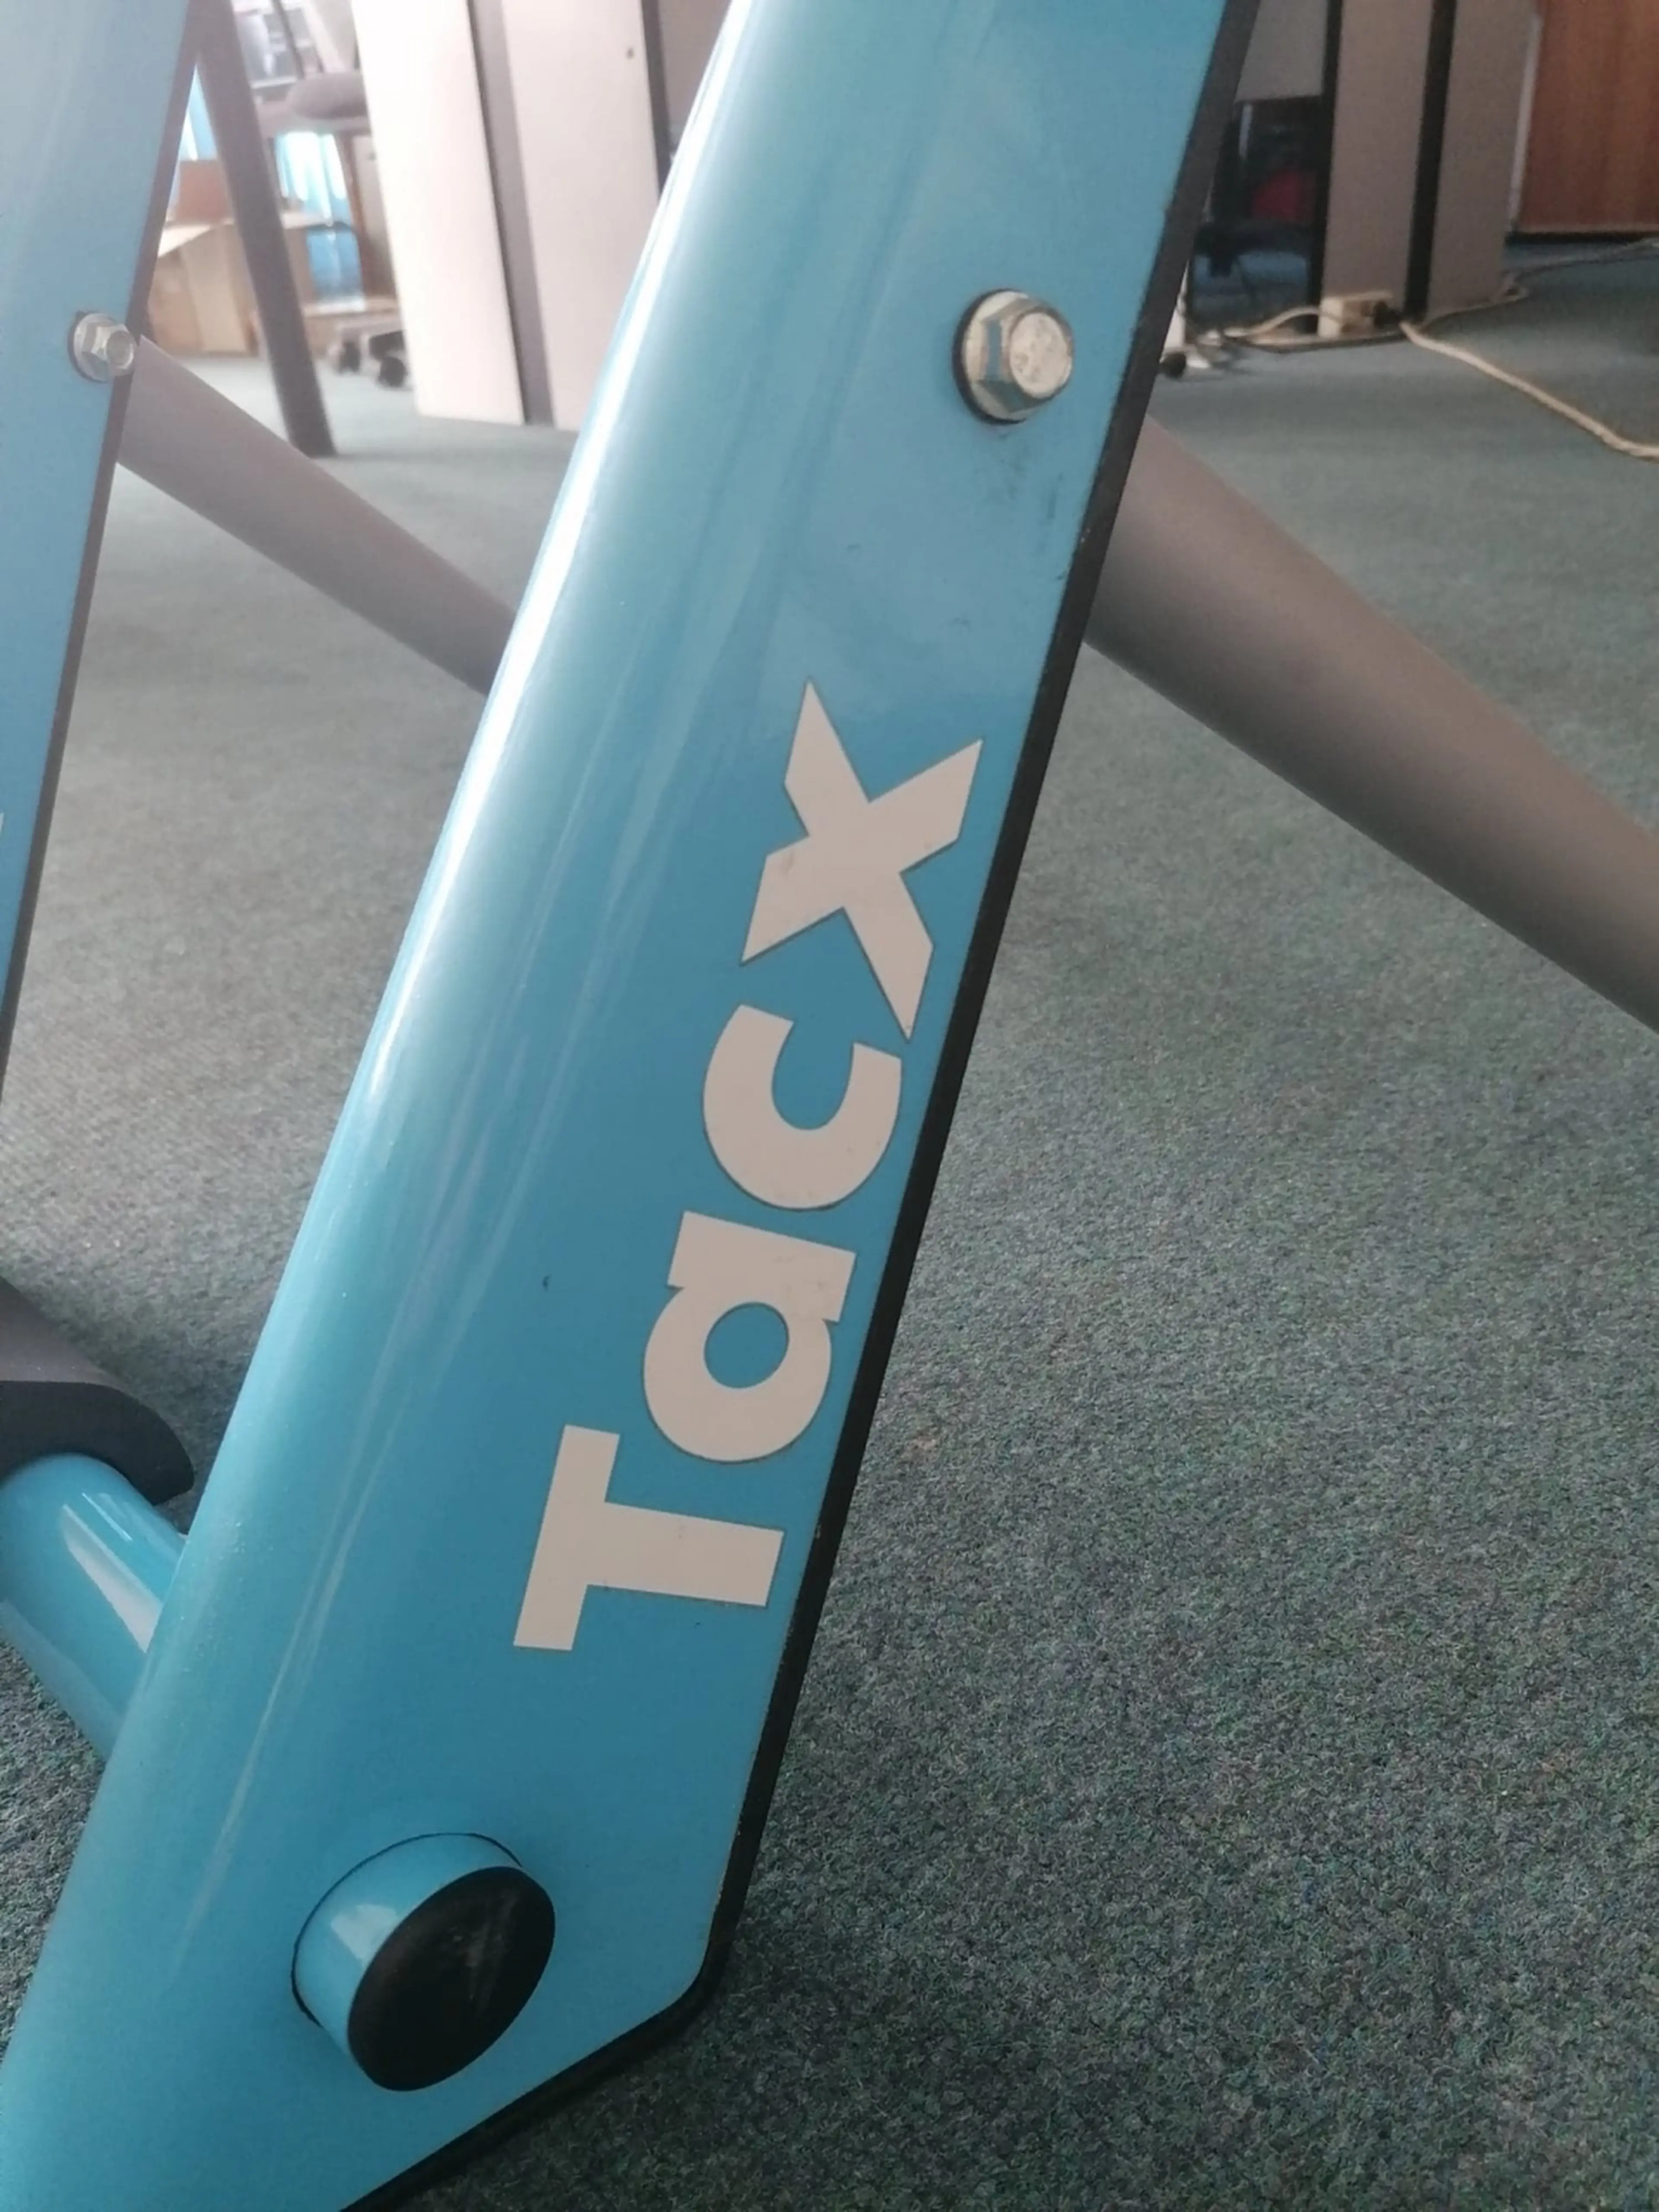 4. Home Trainer Tacx